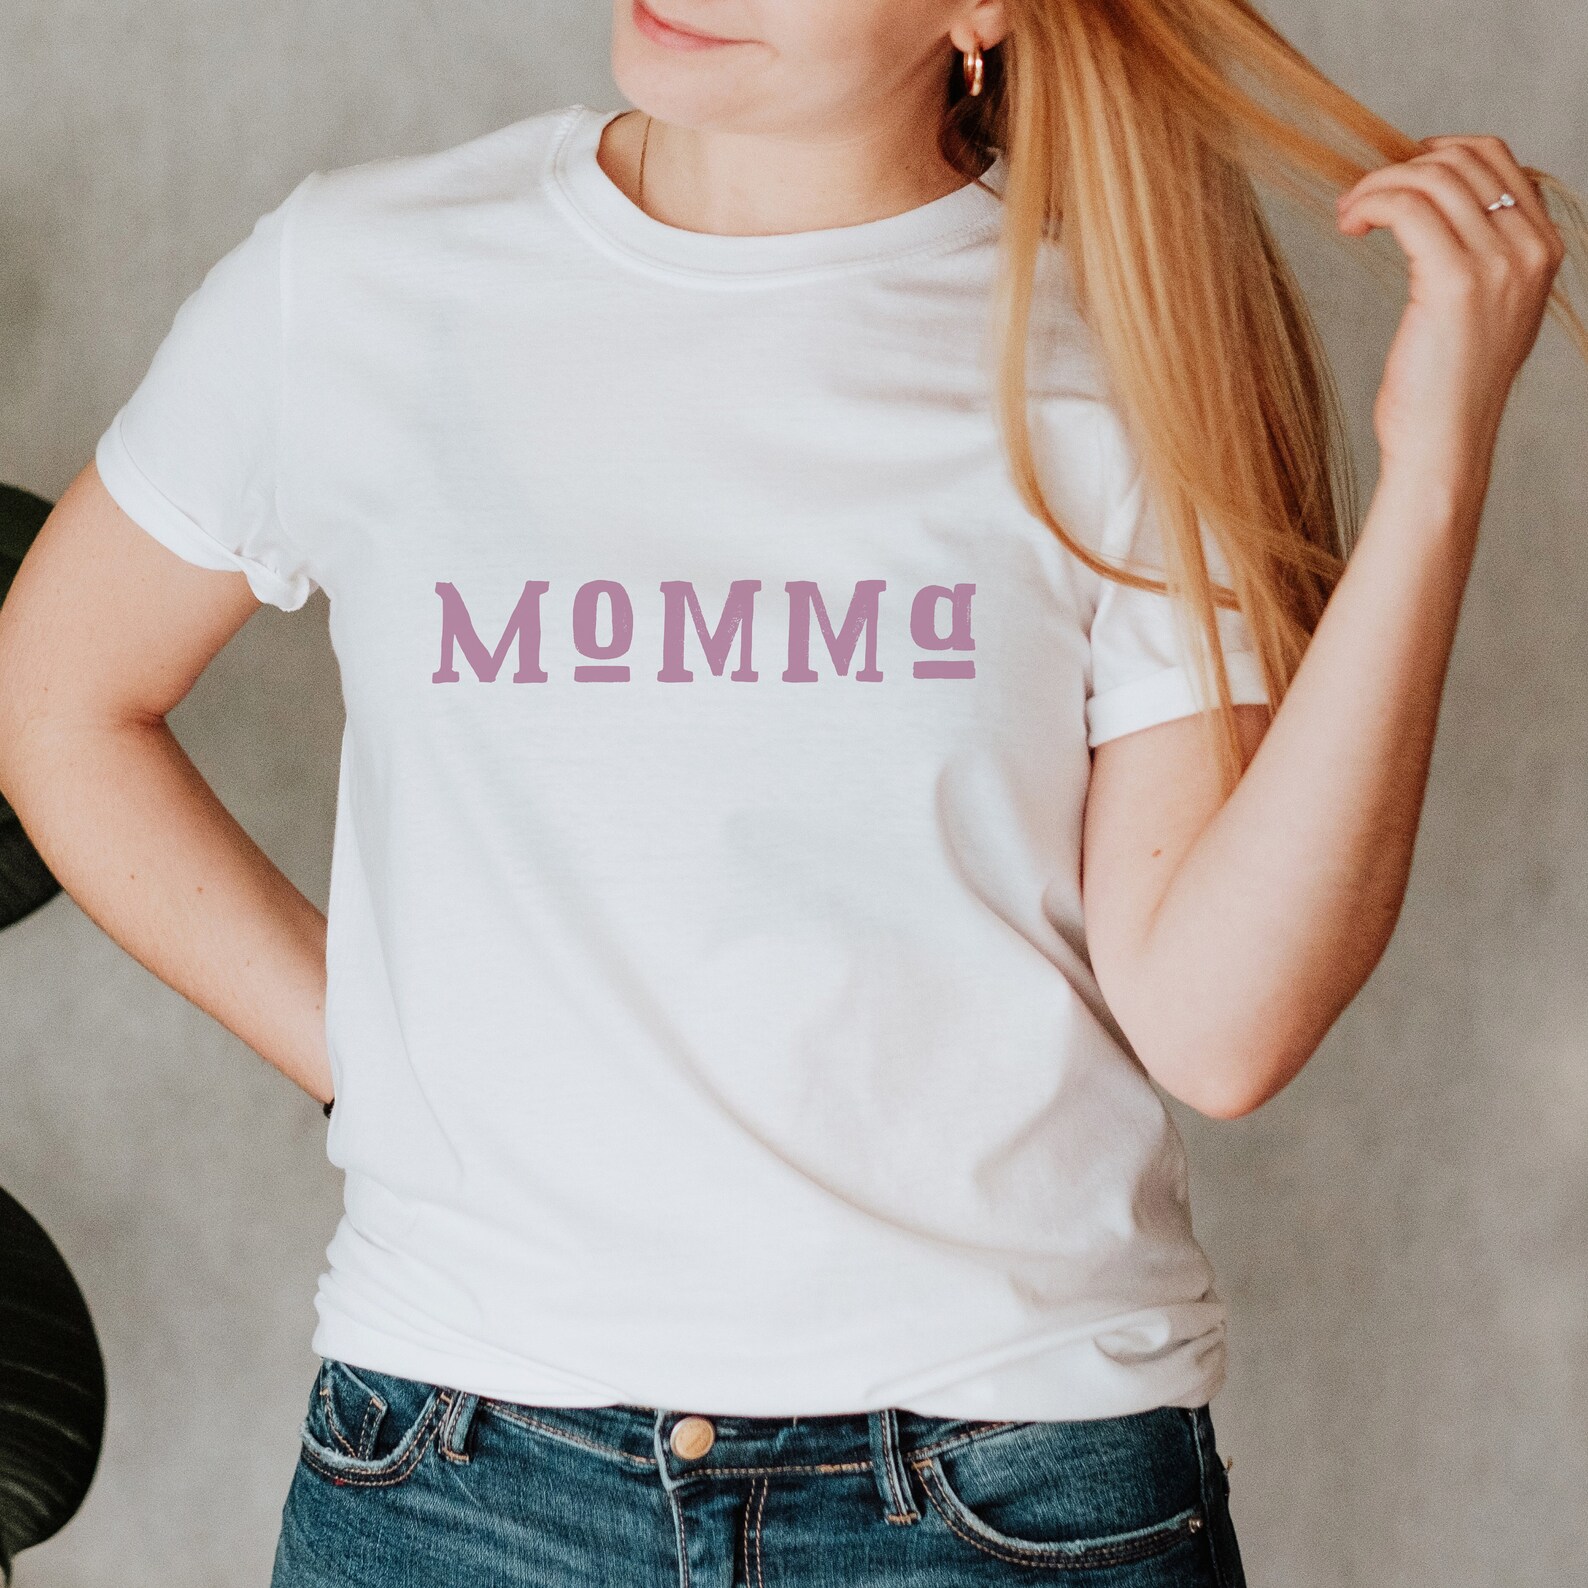 Momma T-Shirt / Mom shirts / gift for mother's Day / gift | Etsy